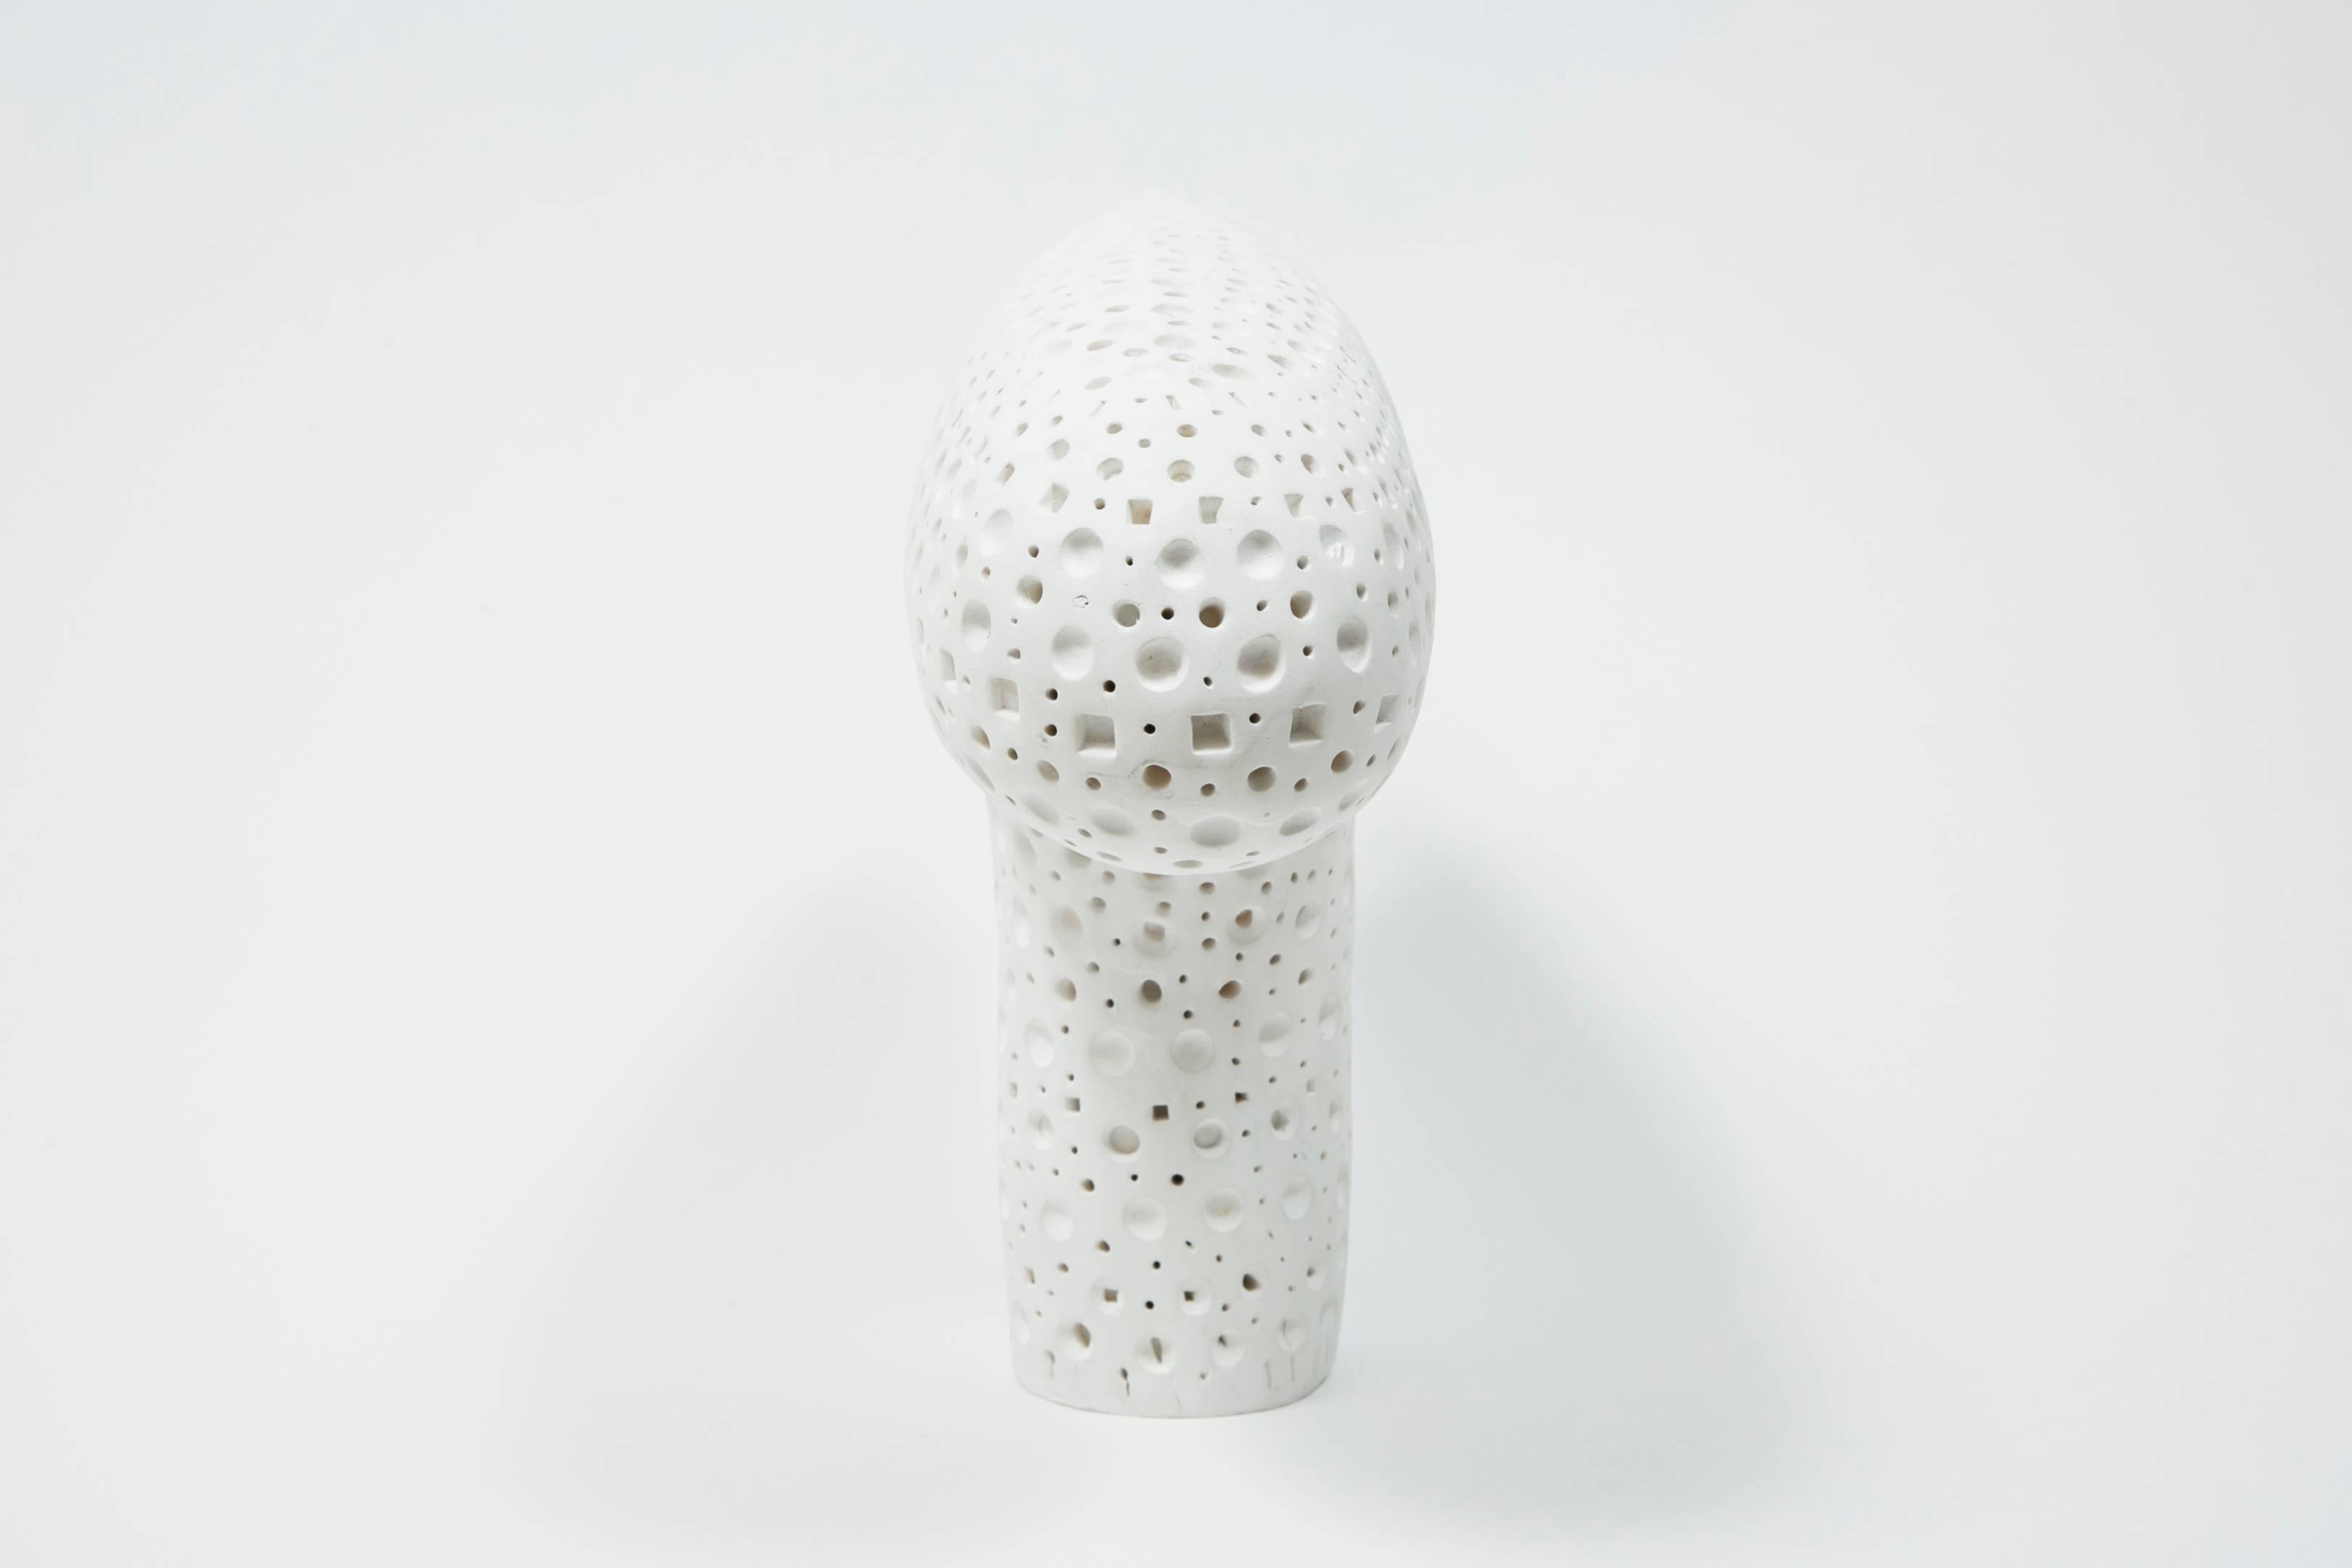 Contemporary White Terracotta Sculpture by Alexandre Ney